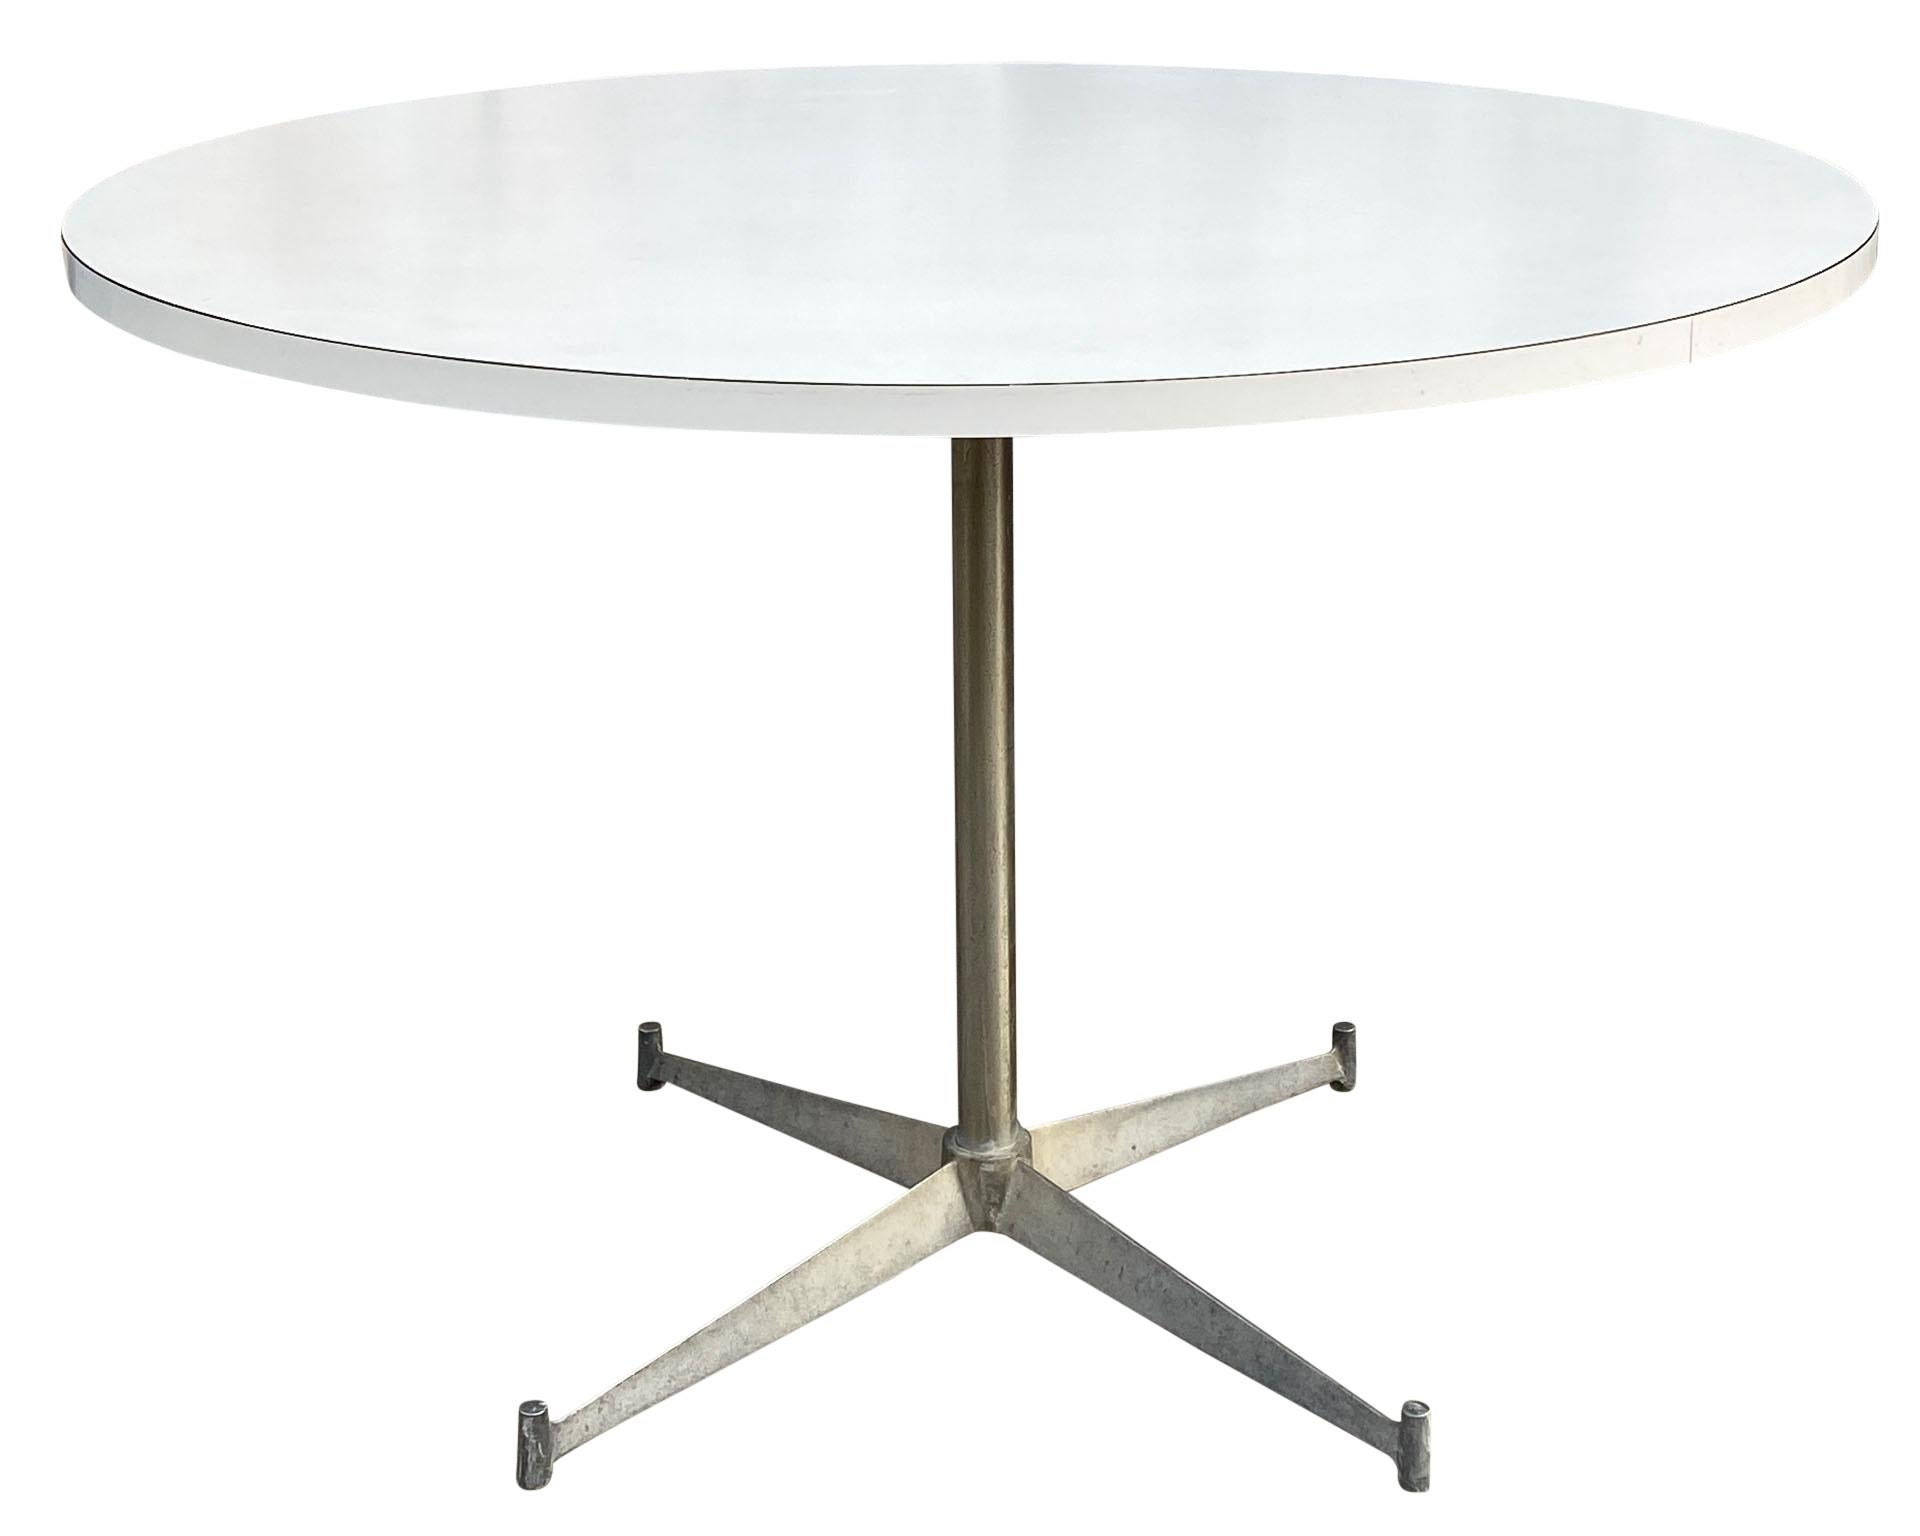 Mid-20th Century Mid-Century Modern Round White Laminate Dining Table by Paul McCobb For Sale